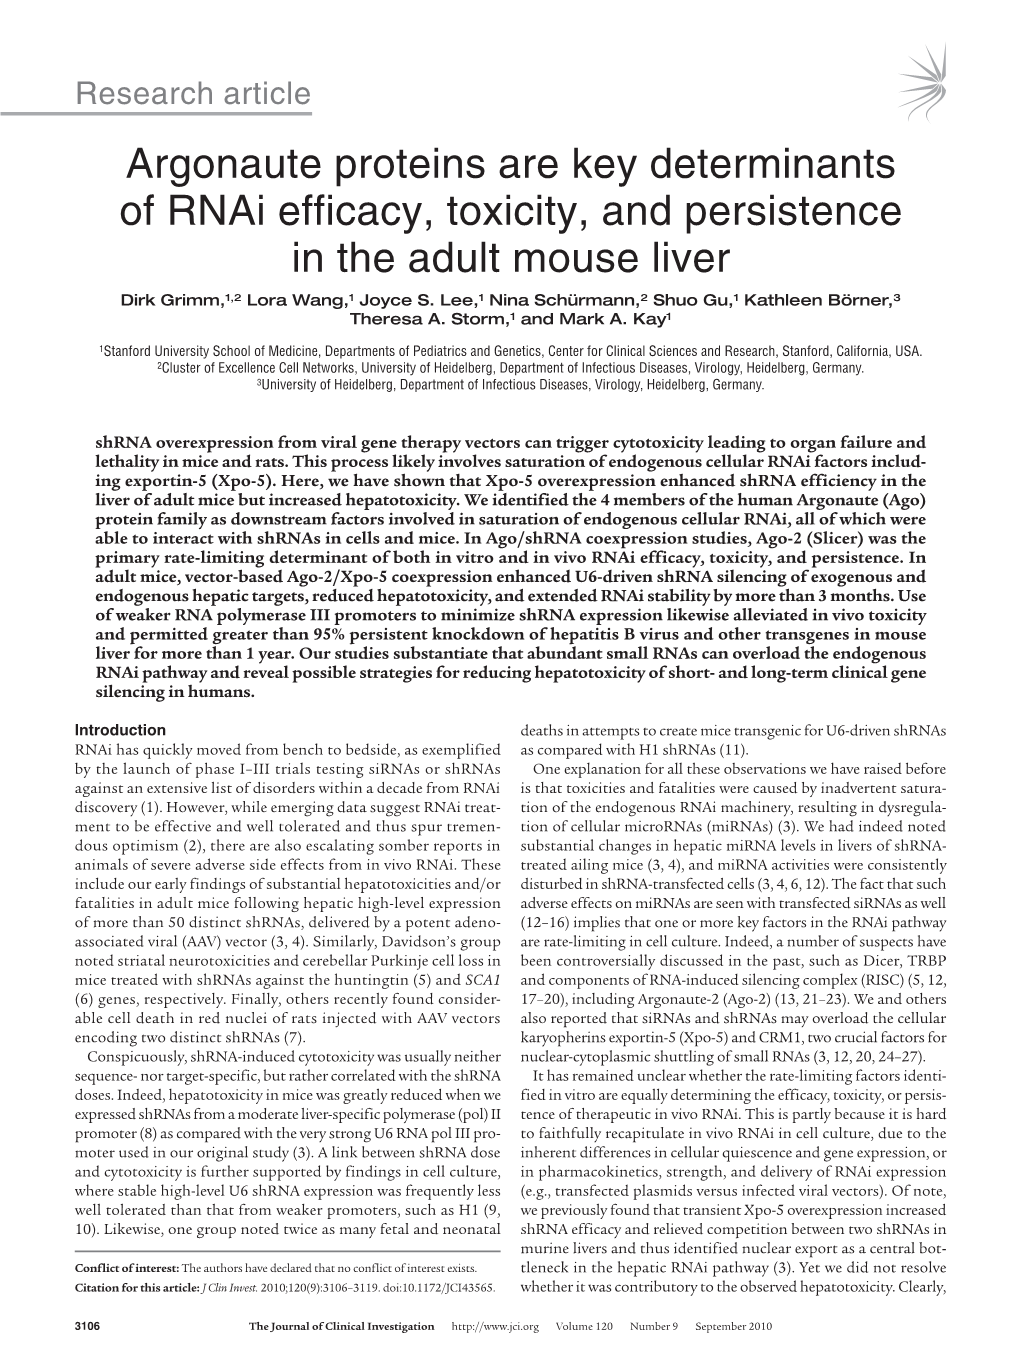 Argonaute Proteins Are Key Determinants of Rnai Efficacy, Toxicity, and Persistence in the Adult Mouse Liver Dirk Grimm,1,2 Lora Wang,1 Joyce S